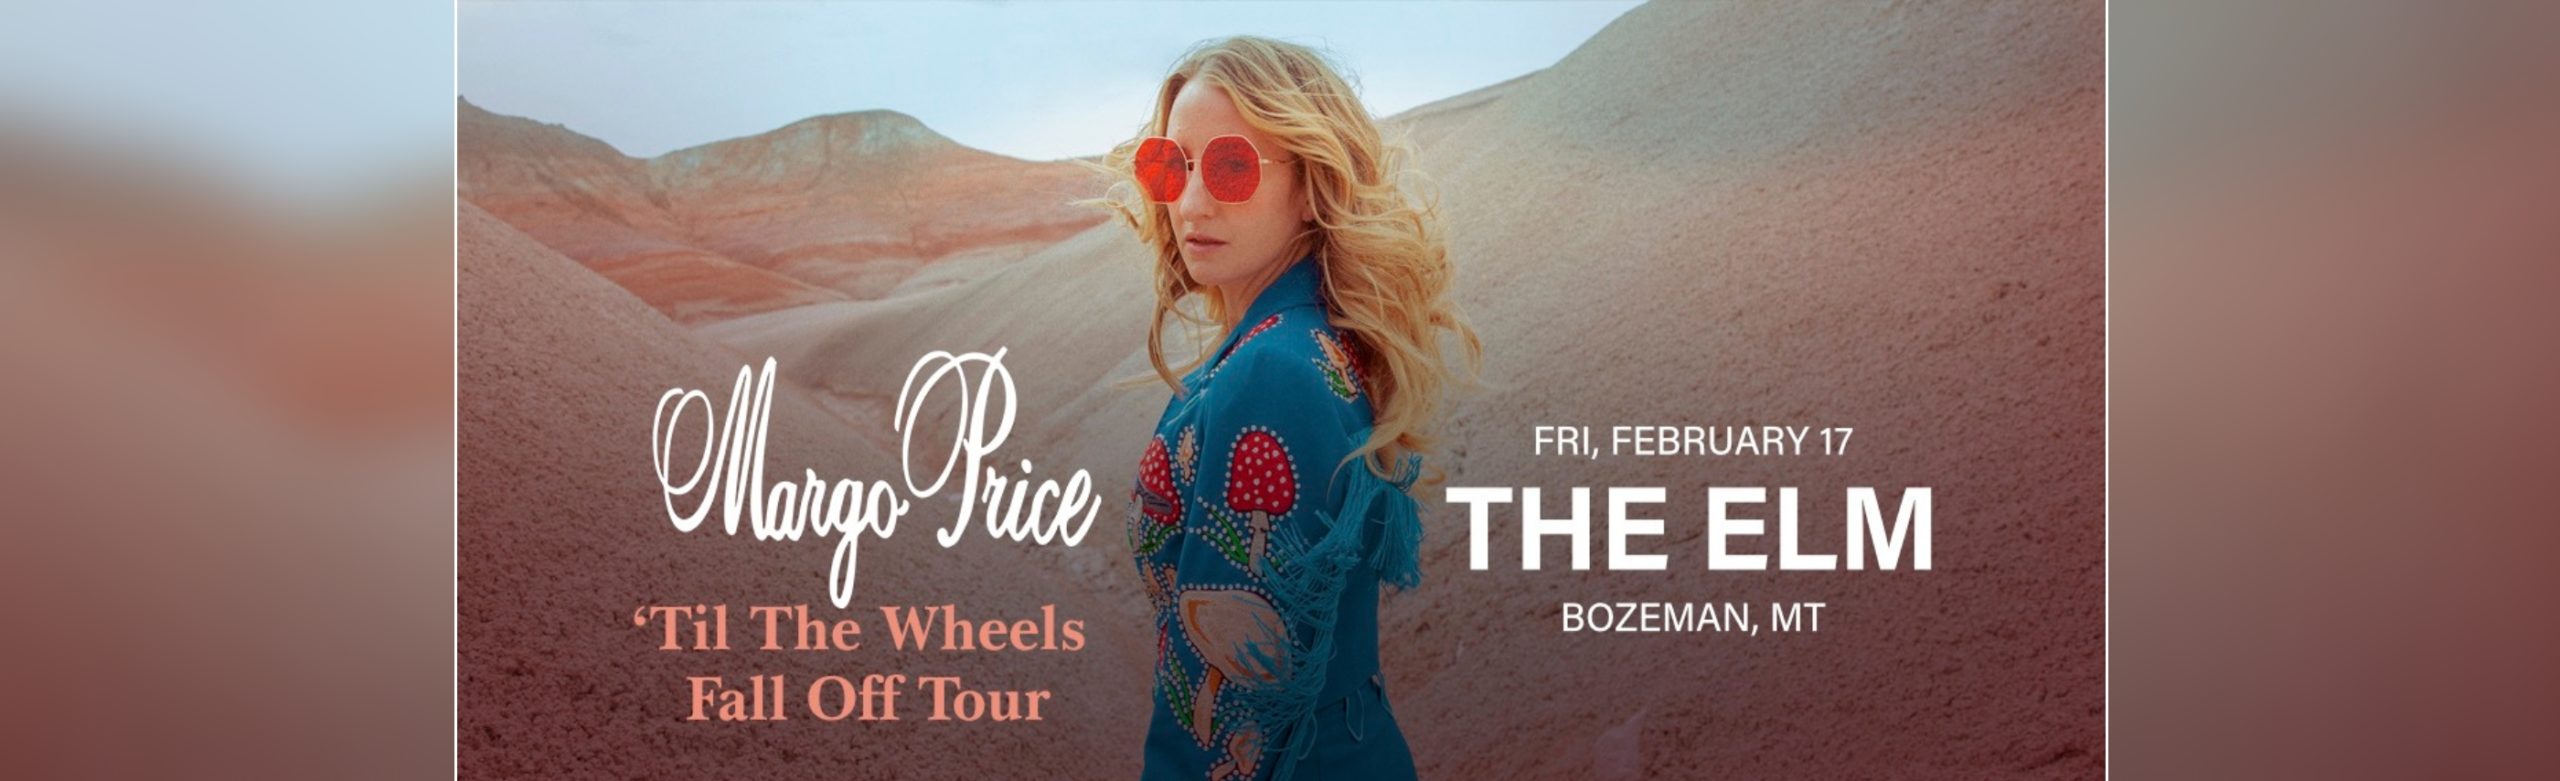 COUNTRY BOOKSHELF: WIN TICKETS TO SEE MARGO PRICE AT THE ELM & HER AUTOGRAPHED MEMOIR